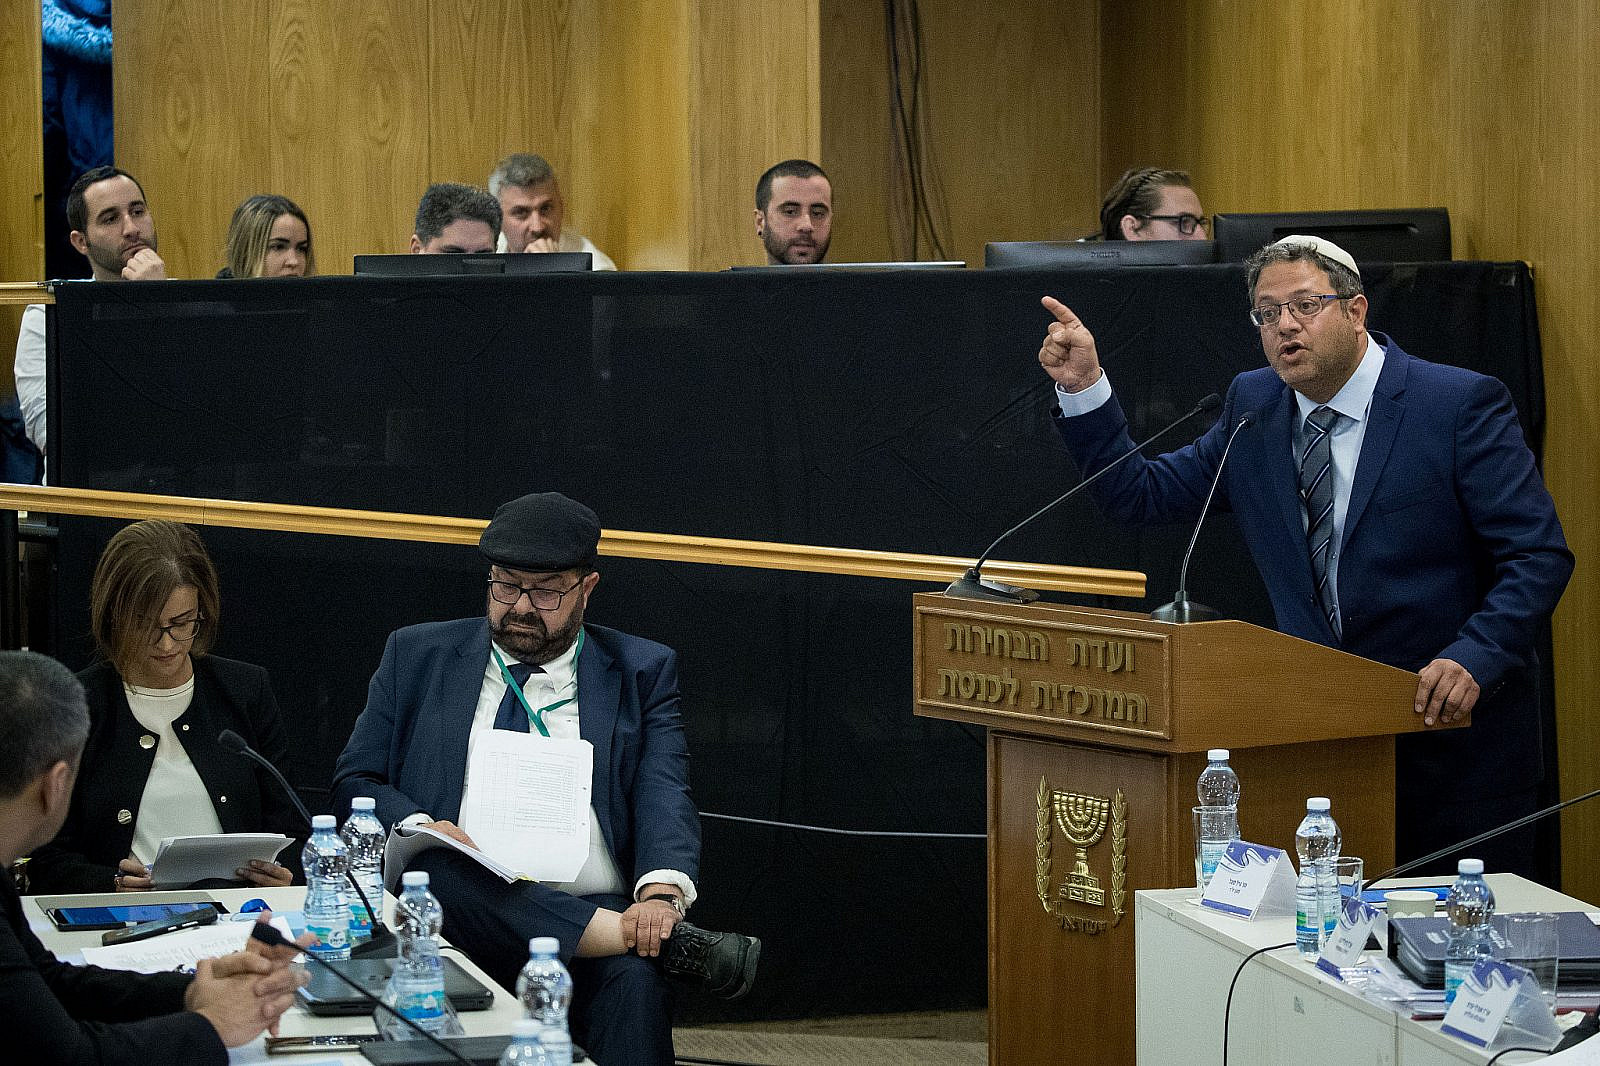 Otzma Yehudit party chairman Itamar Ben Gvir speaks during the Central Elections Committee discussion of requests to disqualify Joint List party member Heba Yazbak from running in the Knesset Elections. January 29, 2020. (Yonatan Sindel/Flash90)